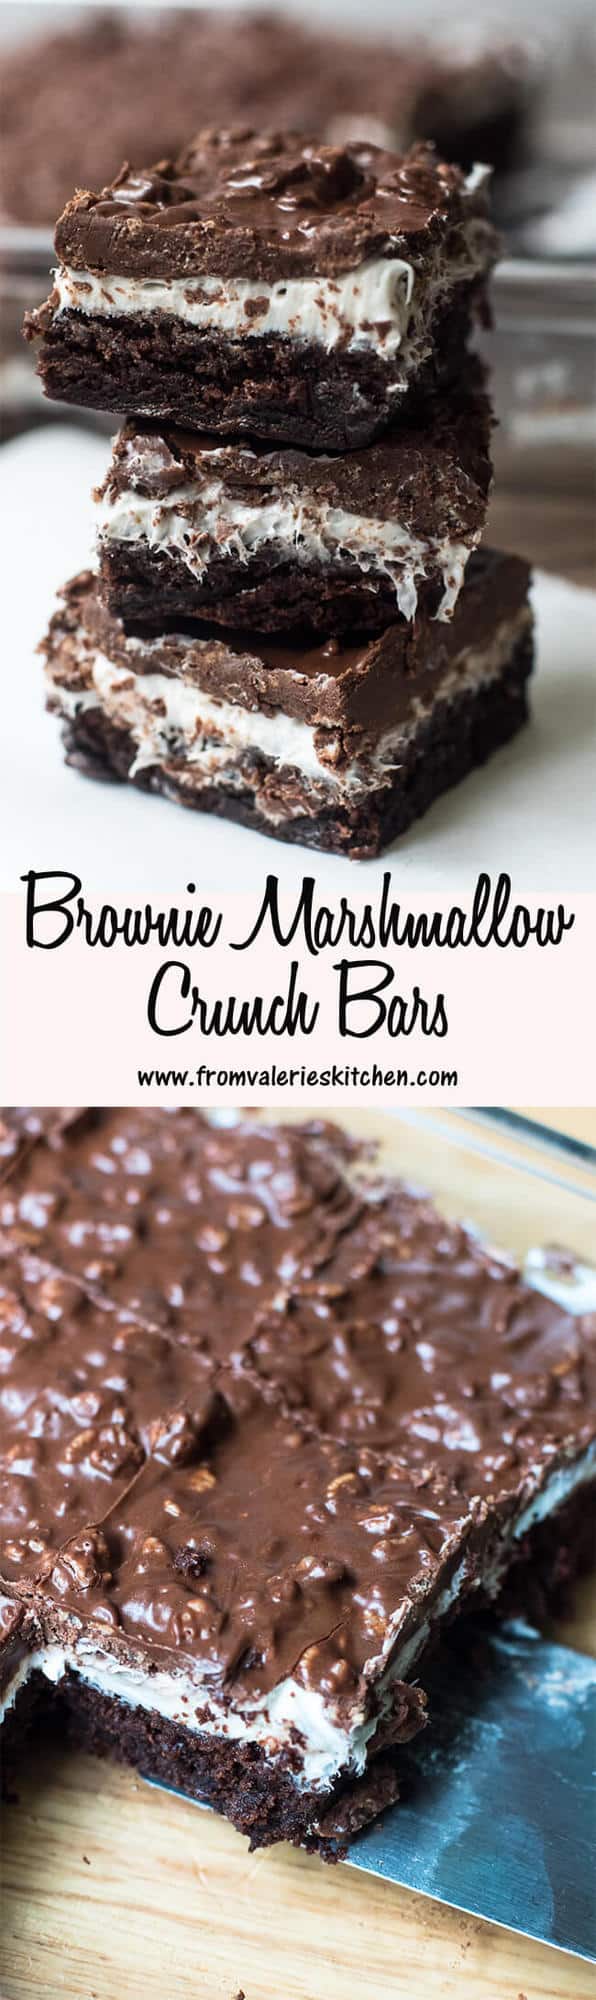 Two images of Brownie Marshmallow Crunch Bars with overlay text.